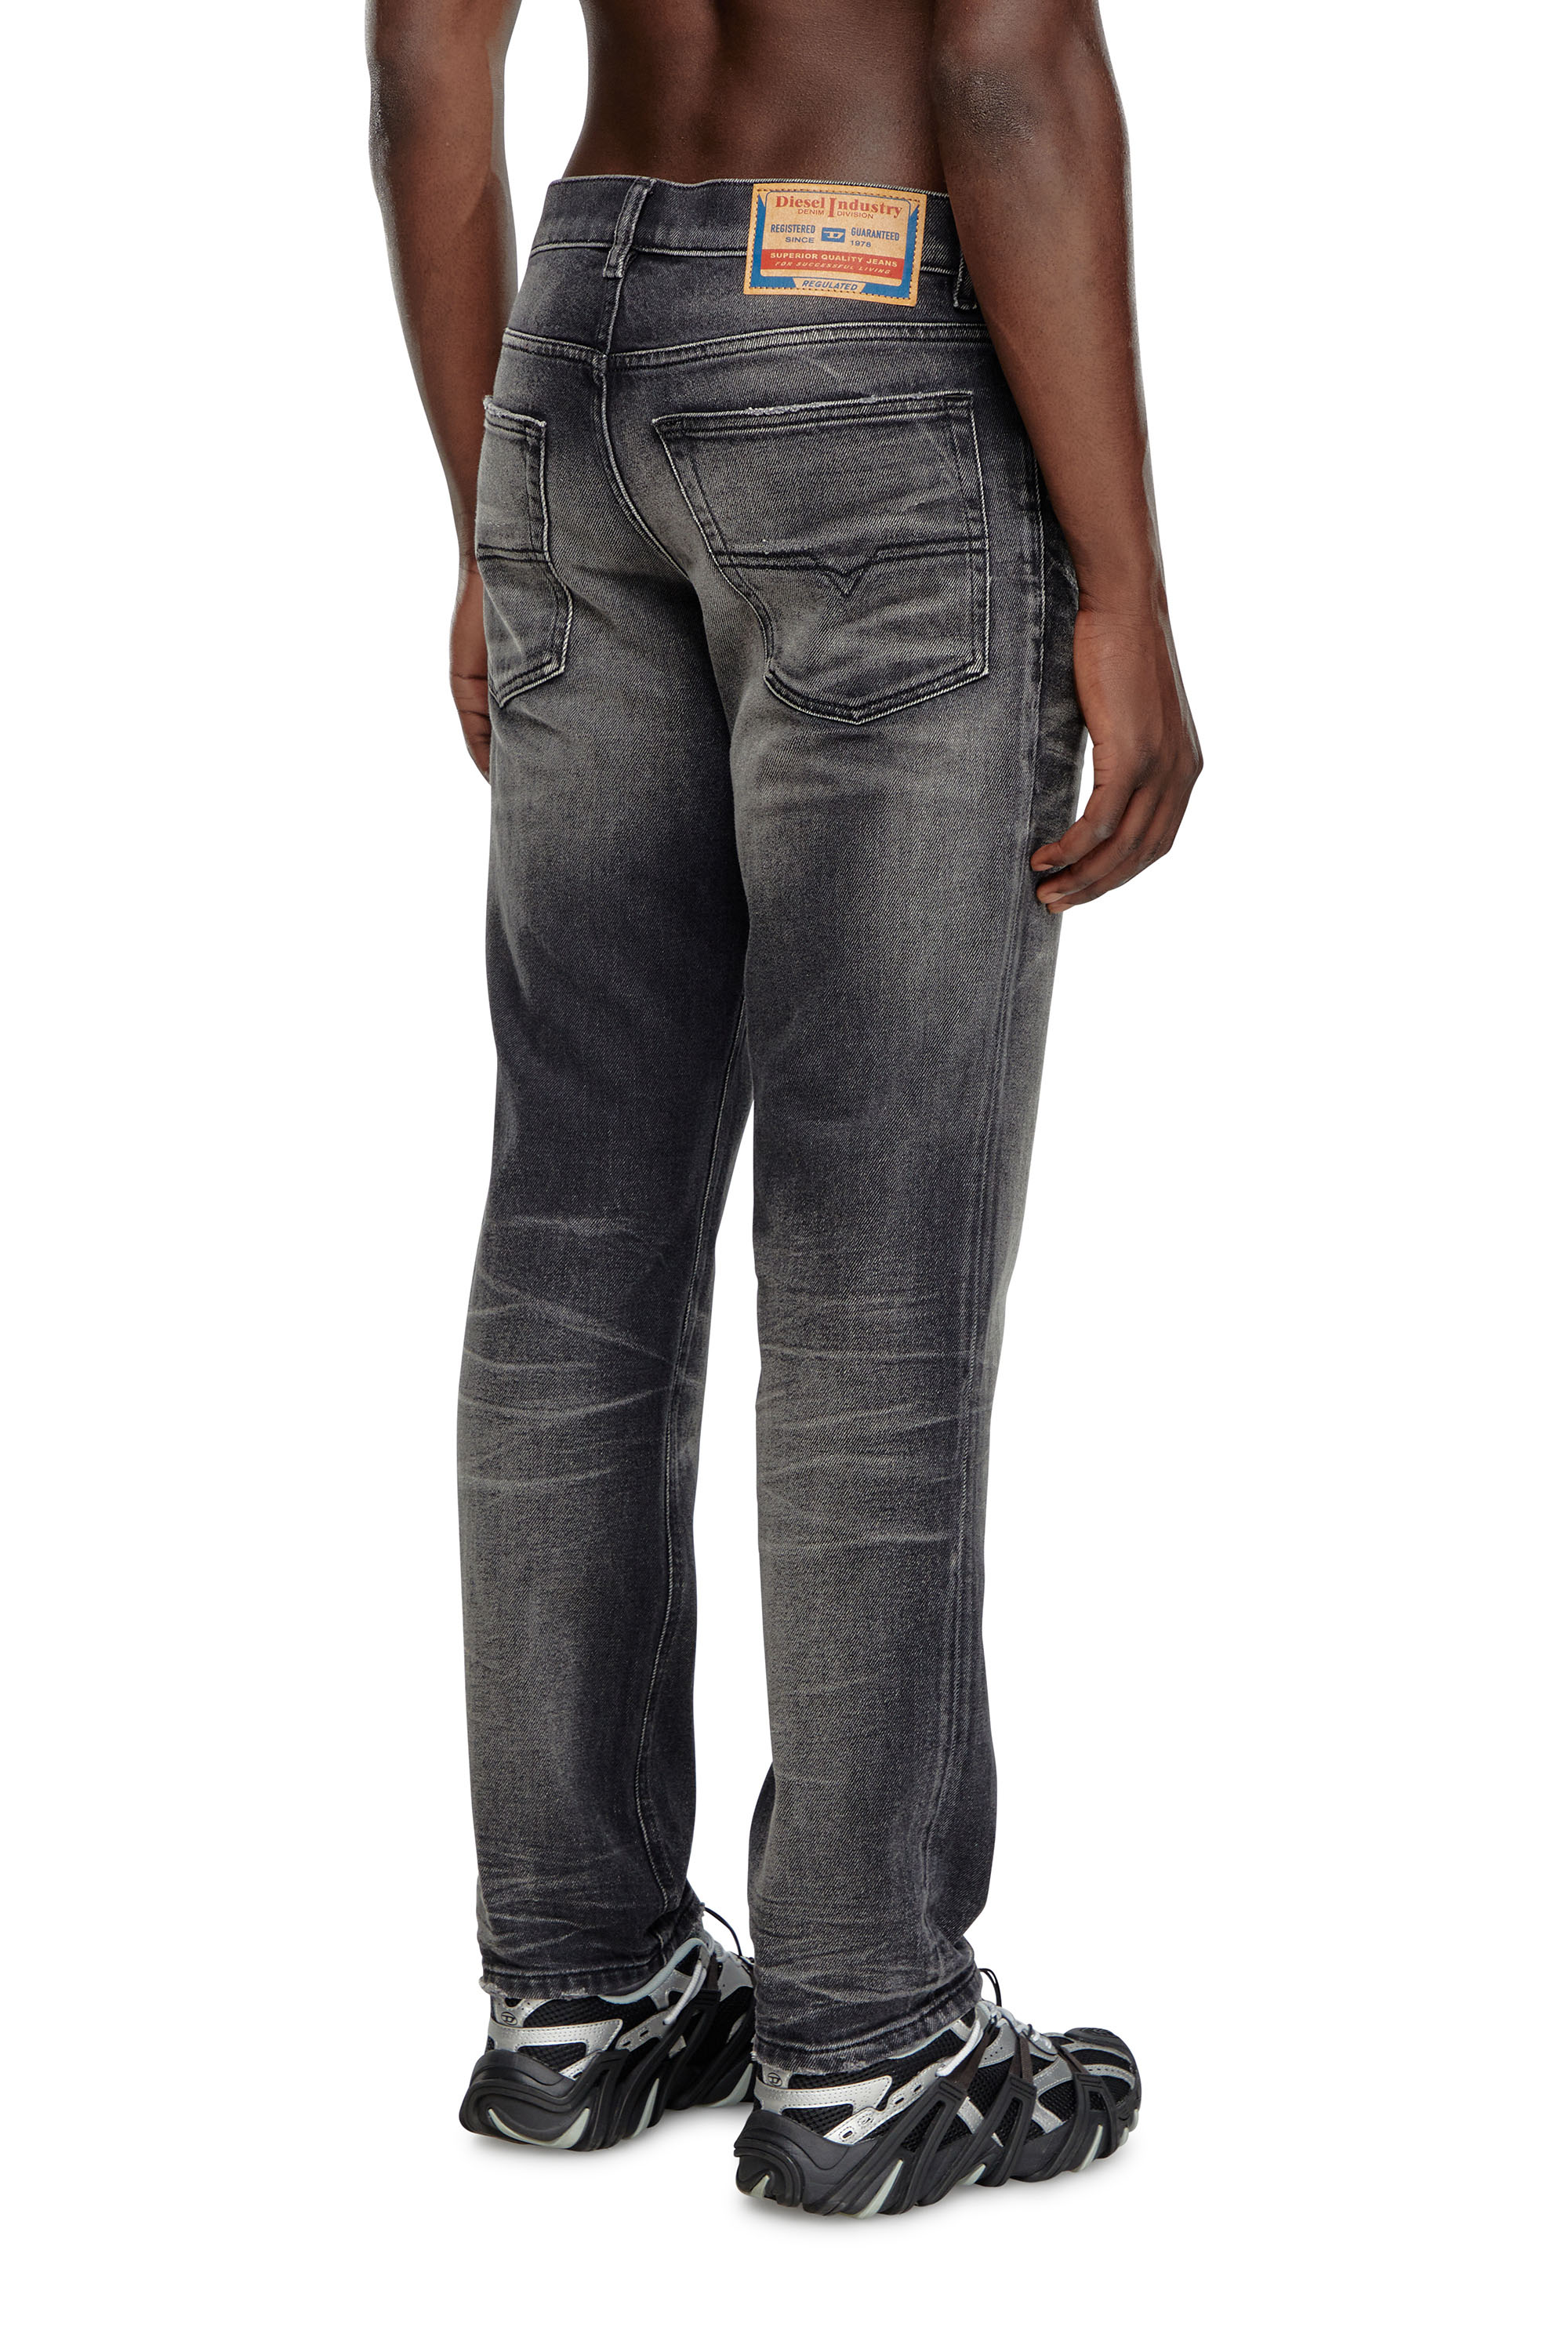 Diesel - Tapered Jeans 2023 D-Finitive 09J65, Hombre Tapered Jeans - 2023 D-Finitive in Negro - Image 4